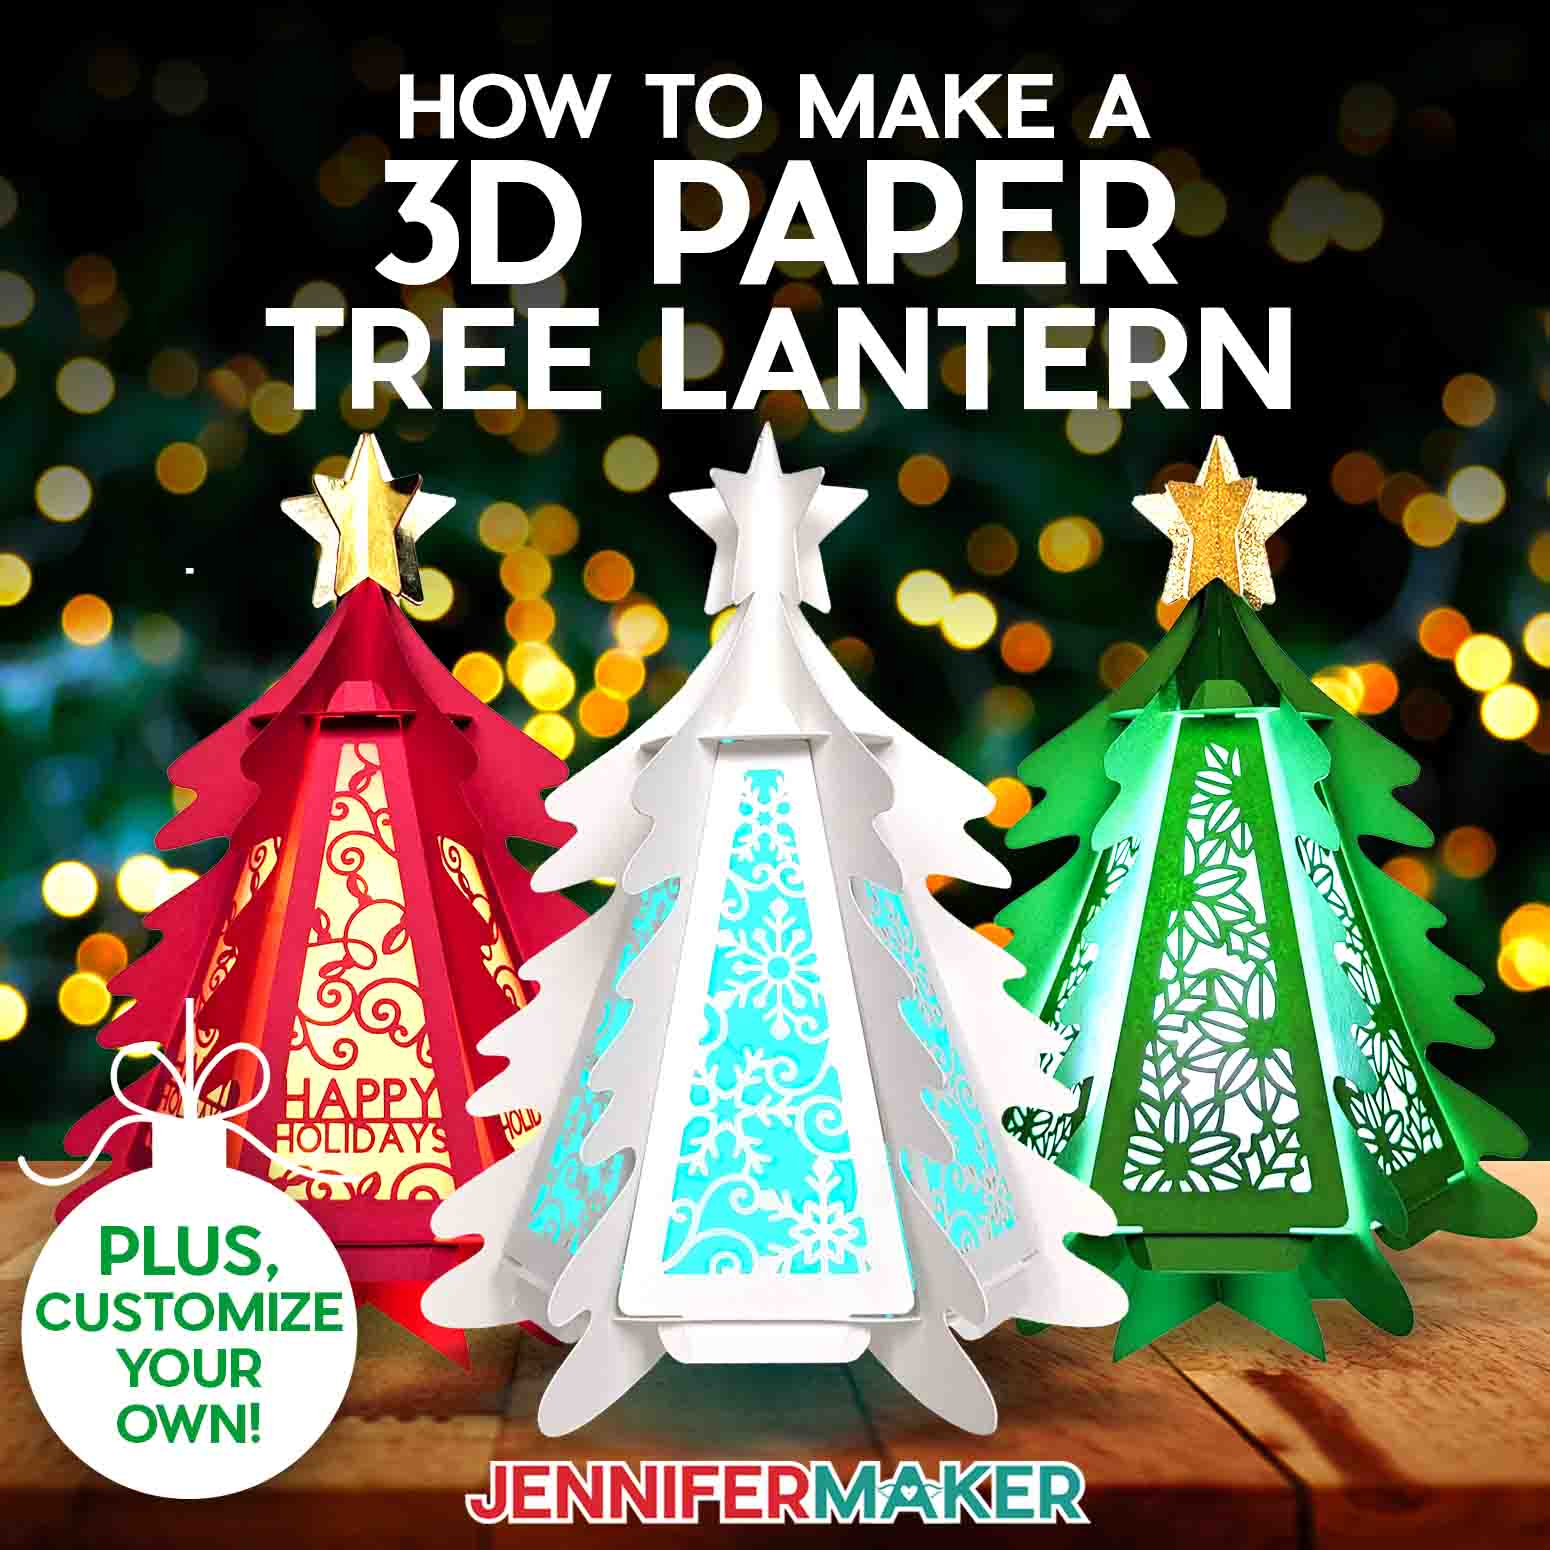 Learn how to make a 3D paper tree lantern with JenniferMaker's tutorial! Three cardstock trees sit illuminated against a background lit with Christmas lights.